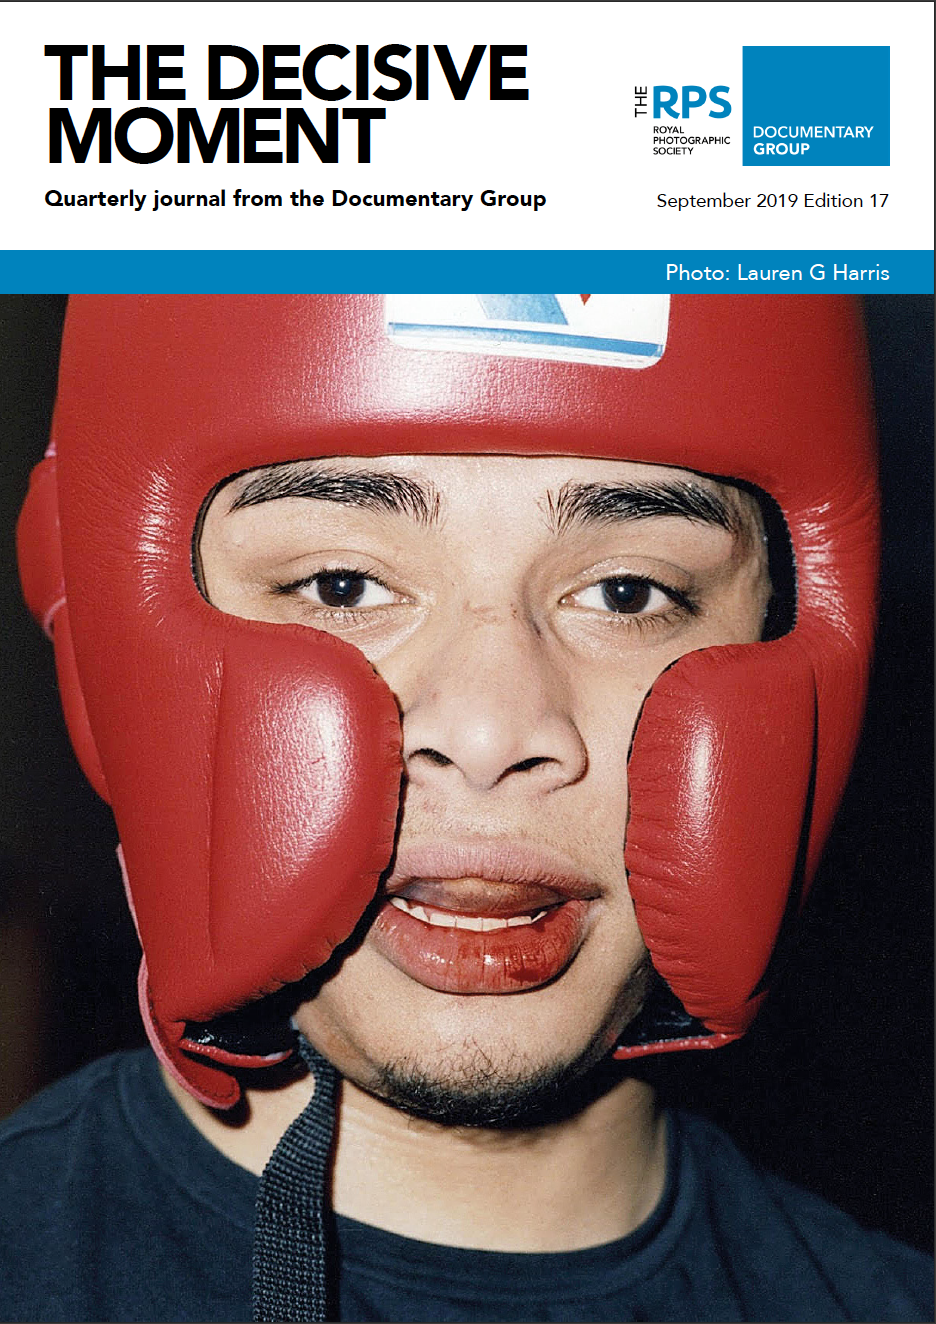 The Decisive Moment cover September 2019 Edition 17; The Boxer by Lauren G Harris